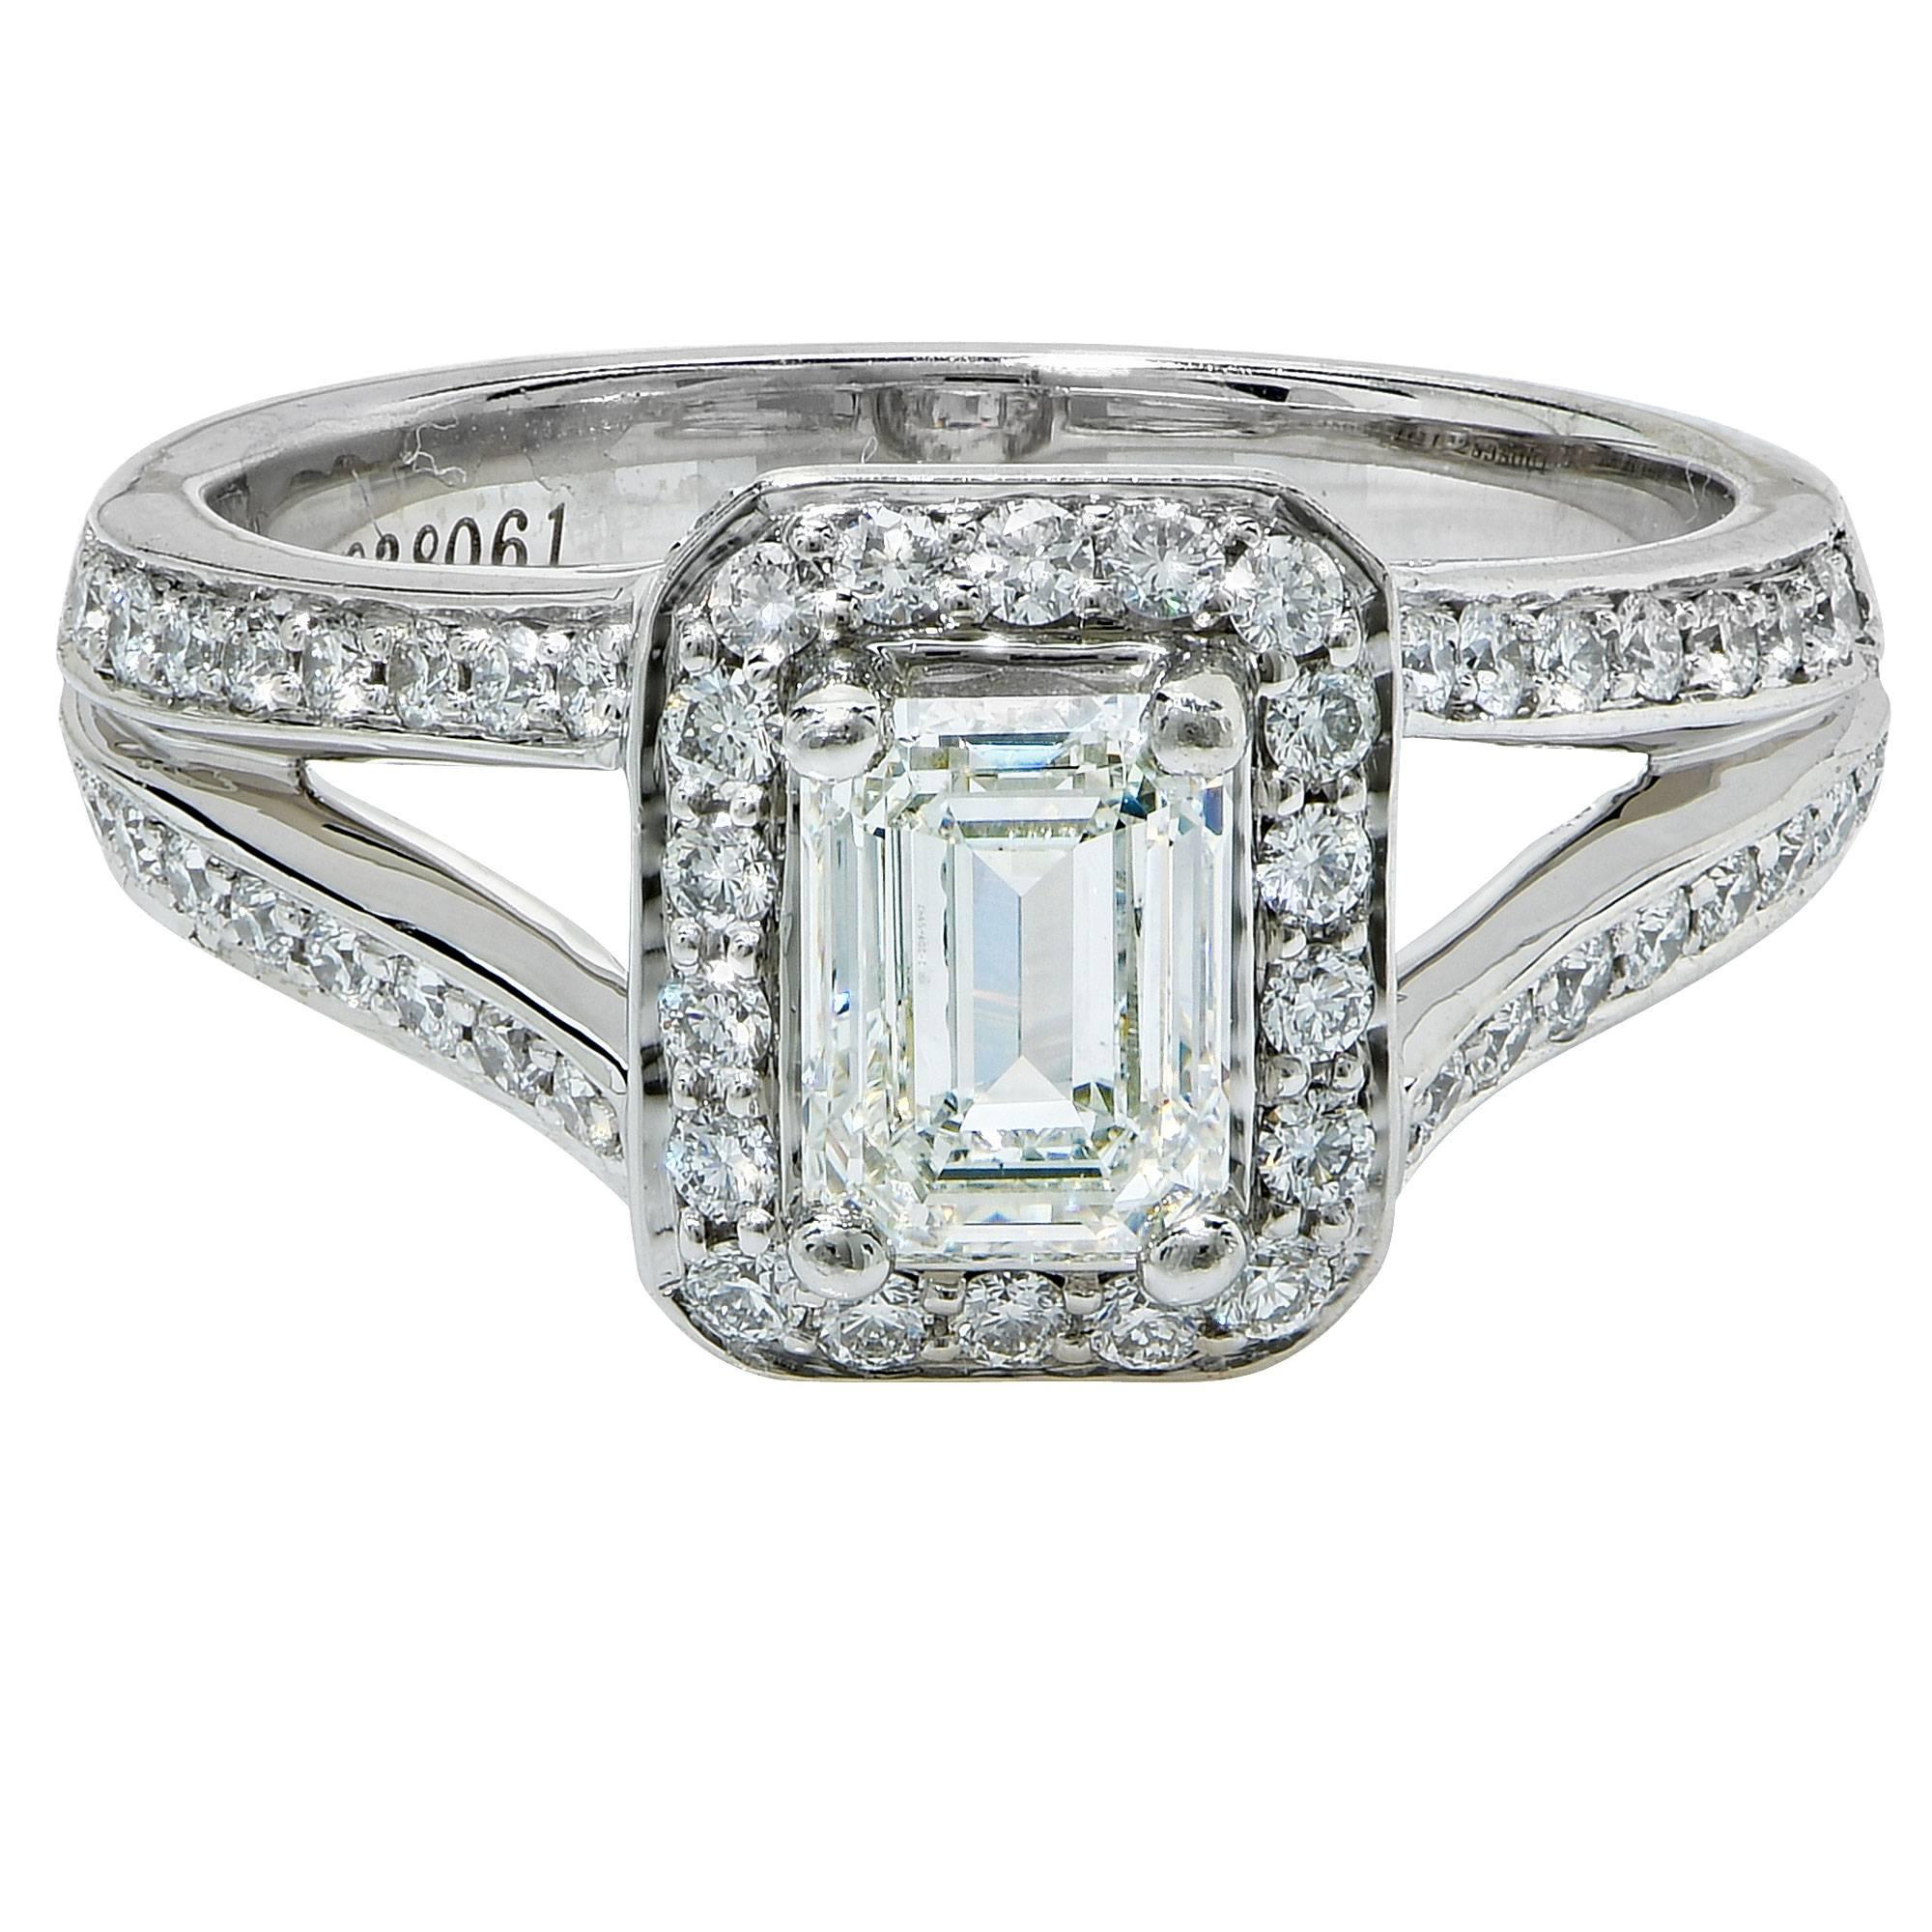 Platinum ring featuring a 1.07ct, I color, VS1 clarity, accented by 64 round brilliant cut diamonds weighing .64cts total, G color, VS clarity.

Ring size: 6 (can be sized up or down free of charge)
Metal weight: 9.79 grams

This diamond ring